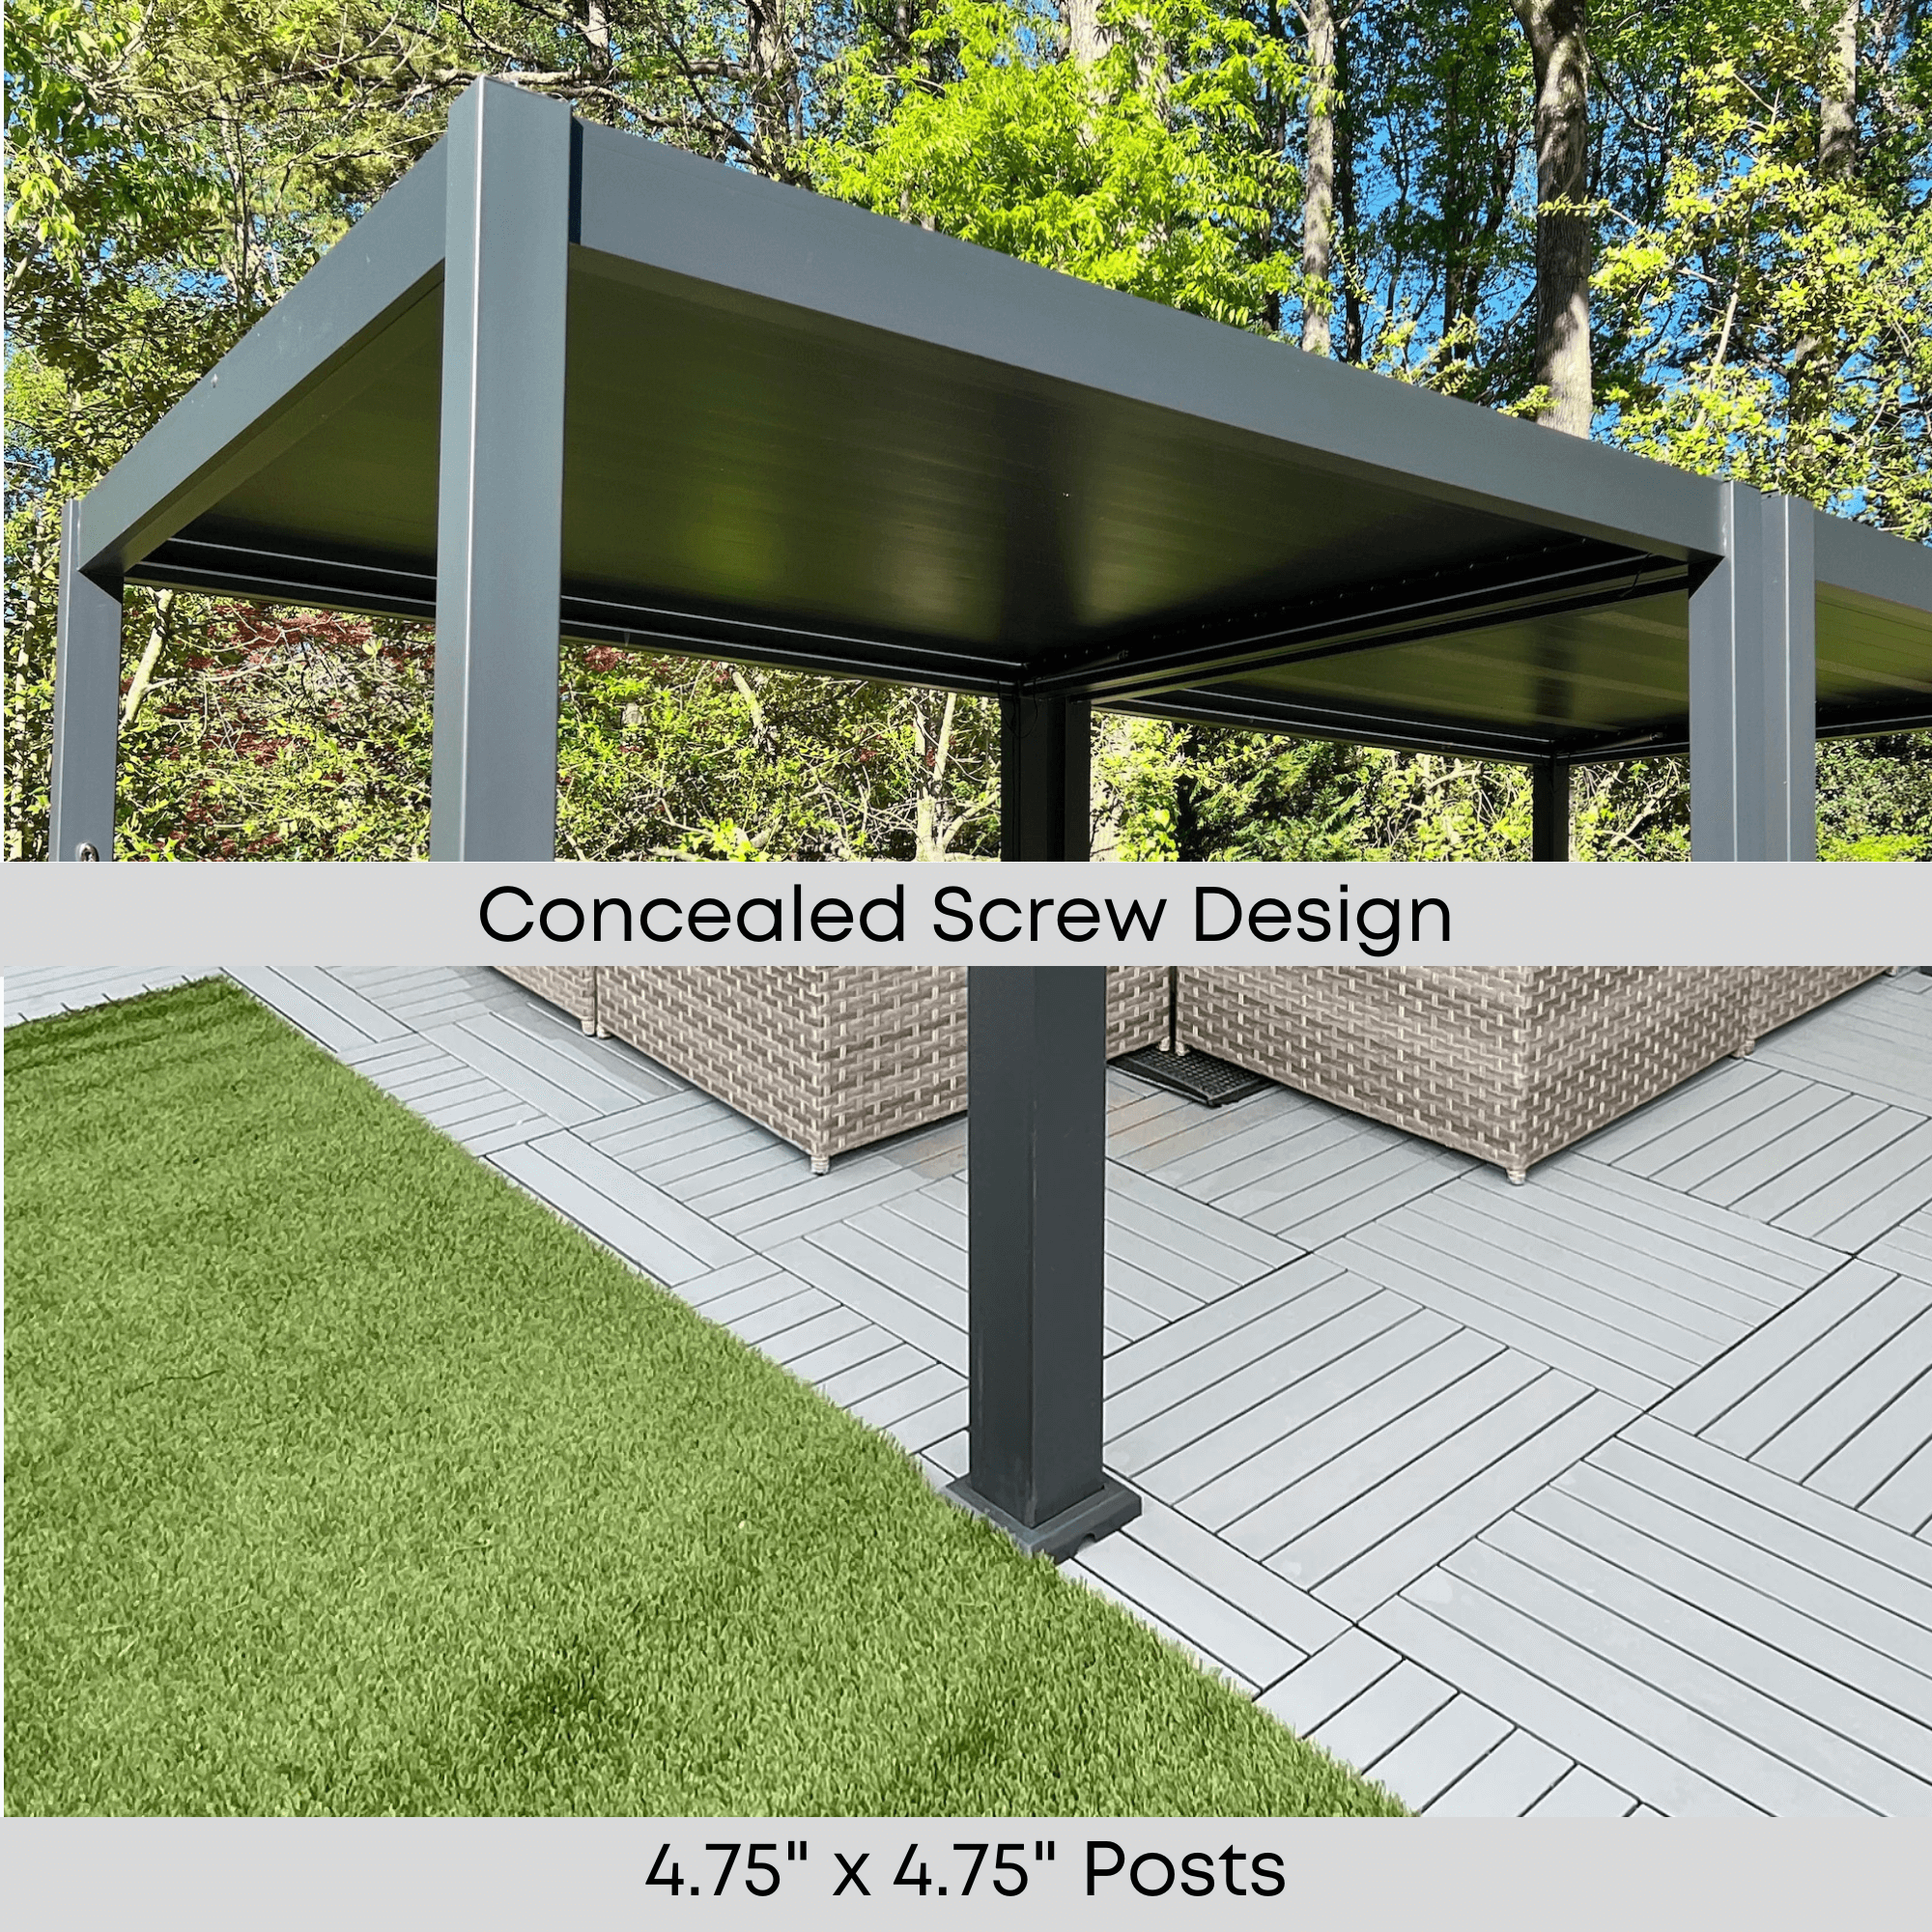 A dark gray aluminum pergola with a motorized louvered roof and LED lighting. Perfect for shade, sun protection, and outdoor gatherings.